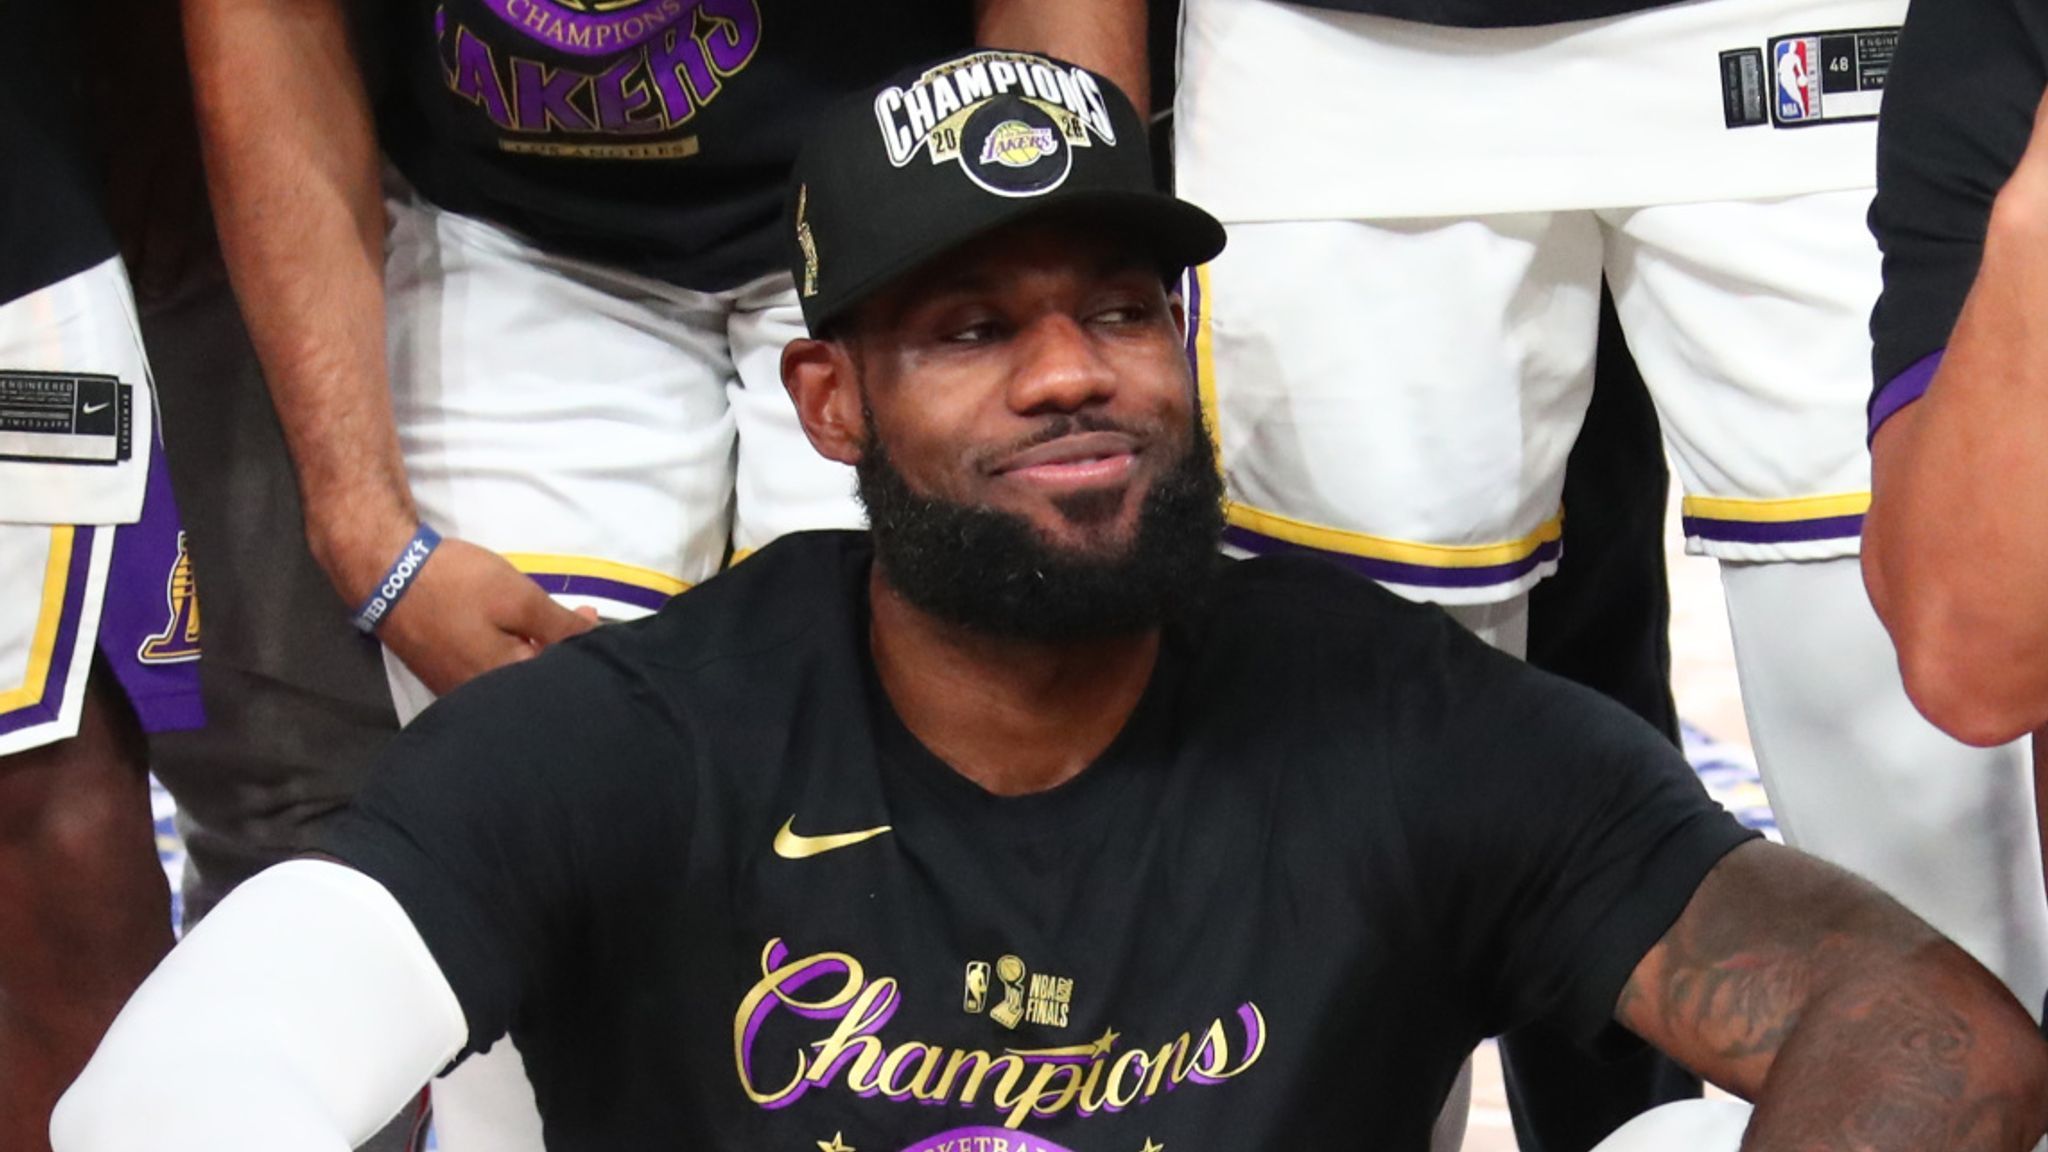 NBA Finals 2020: LeBron James returns Los Angeles Lakers to glory with MVP performance